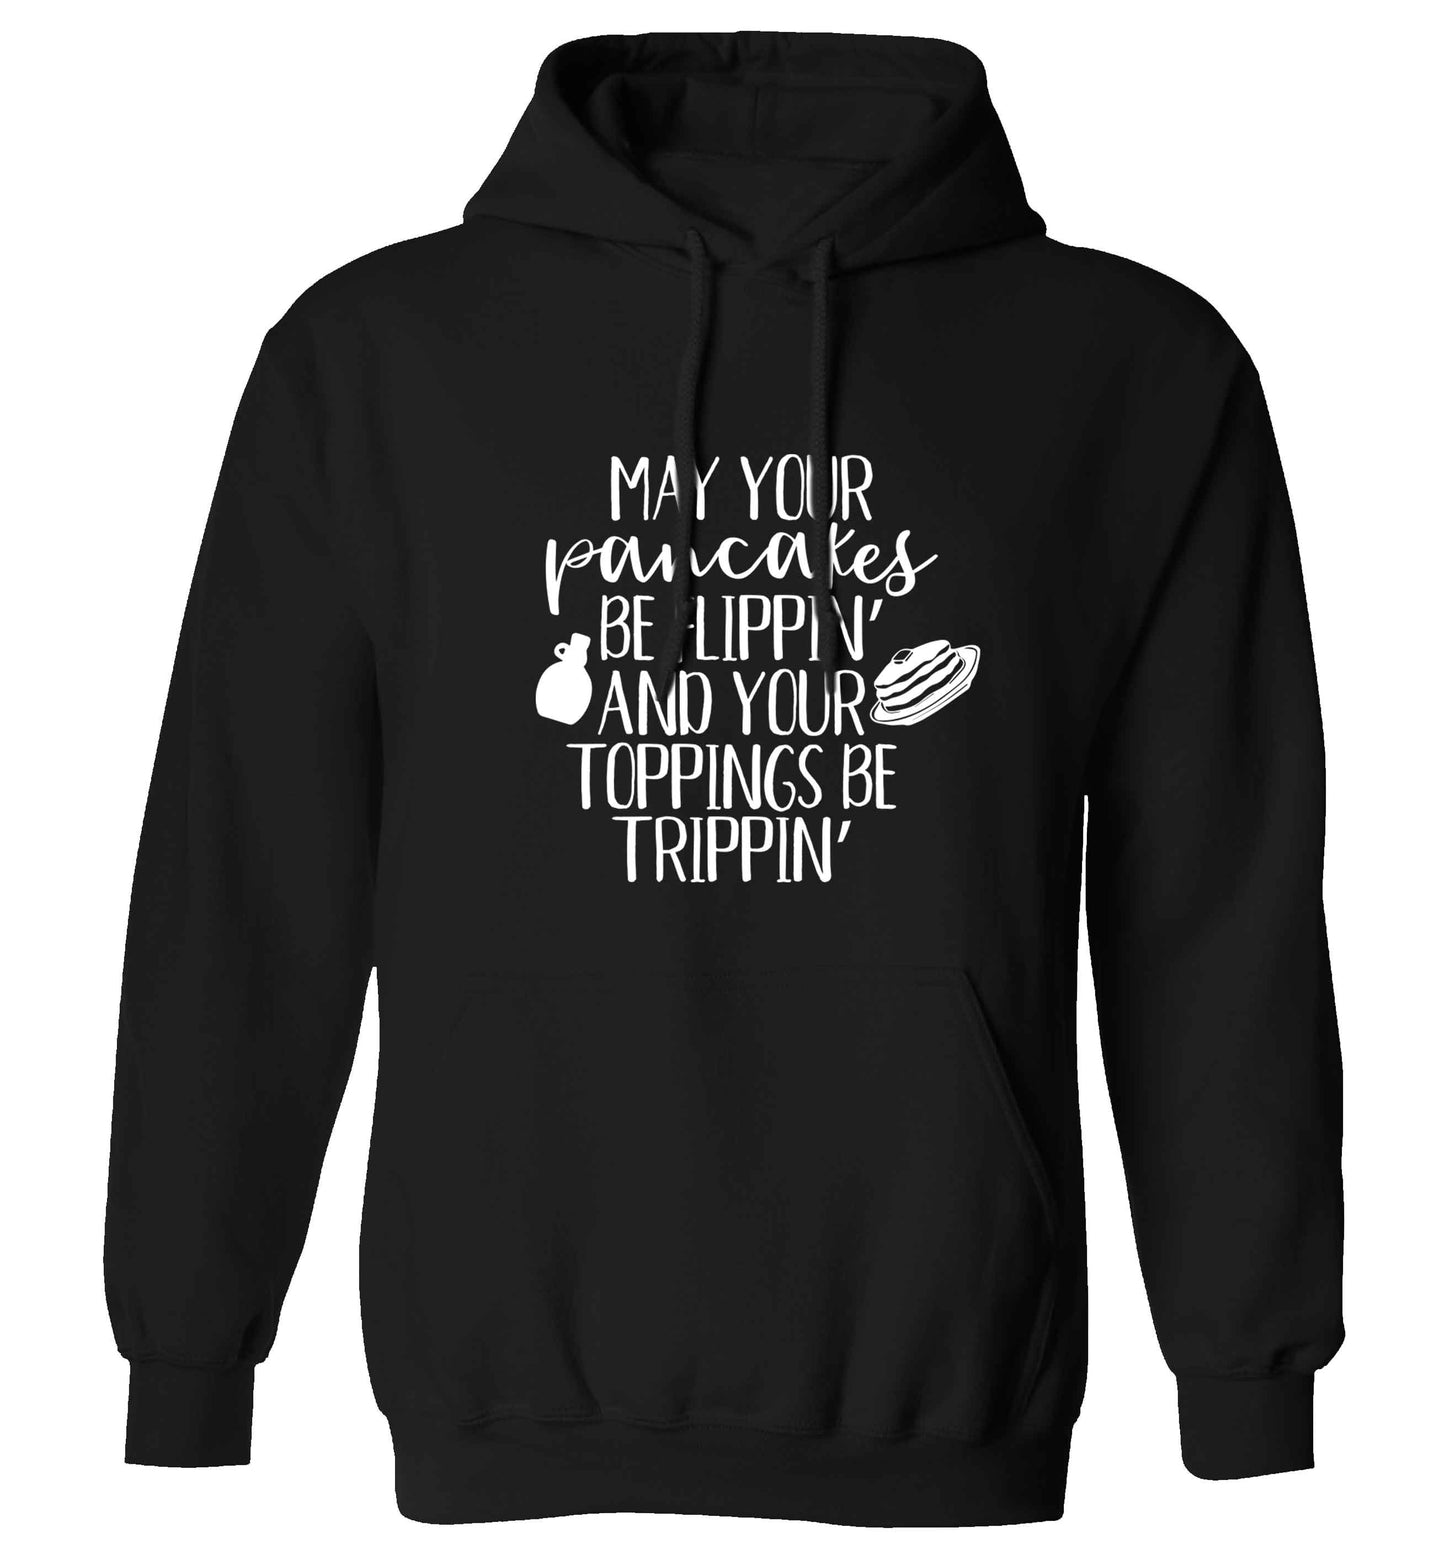 May your pancakes be flippin' and your toppings be trippin' adults unisex black hoodie 2XL